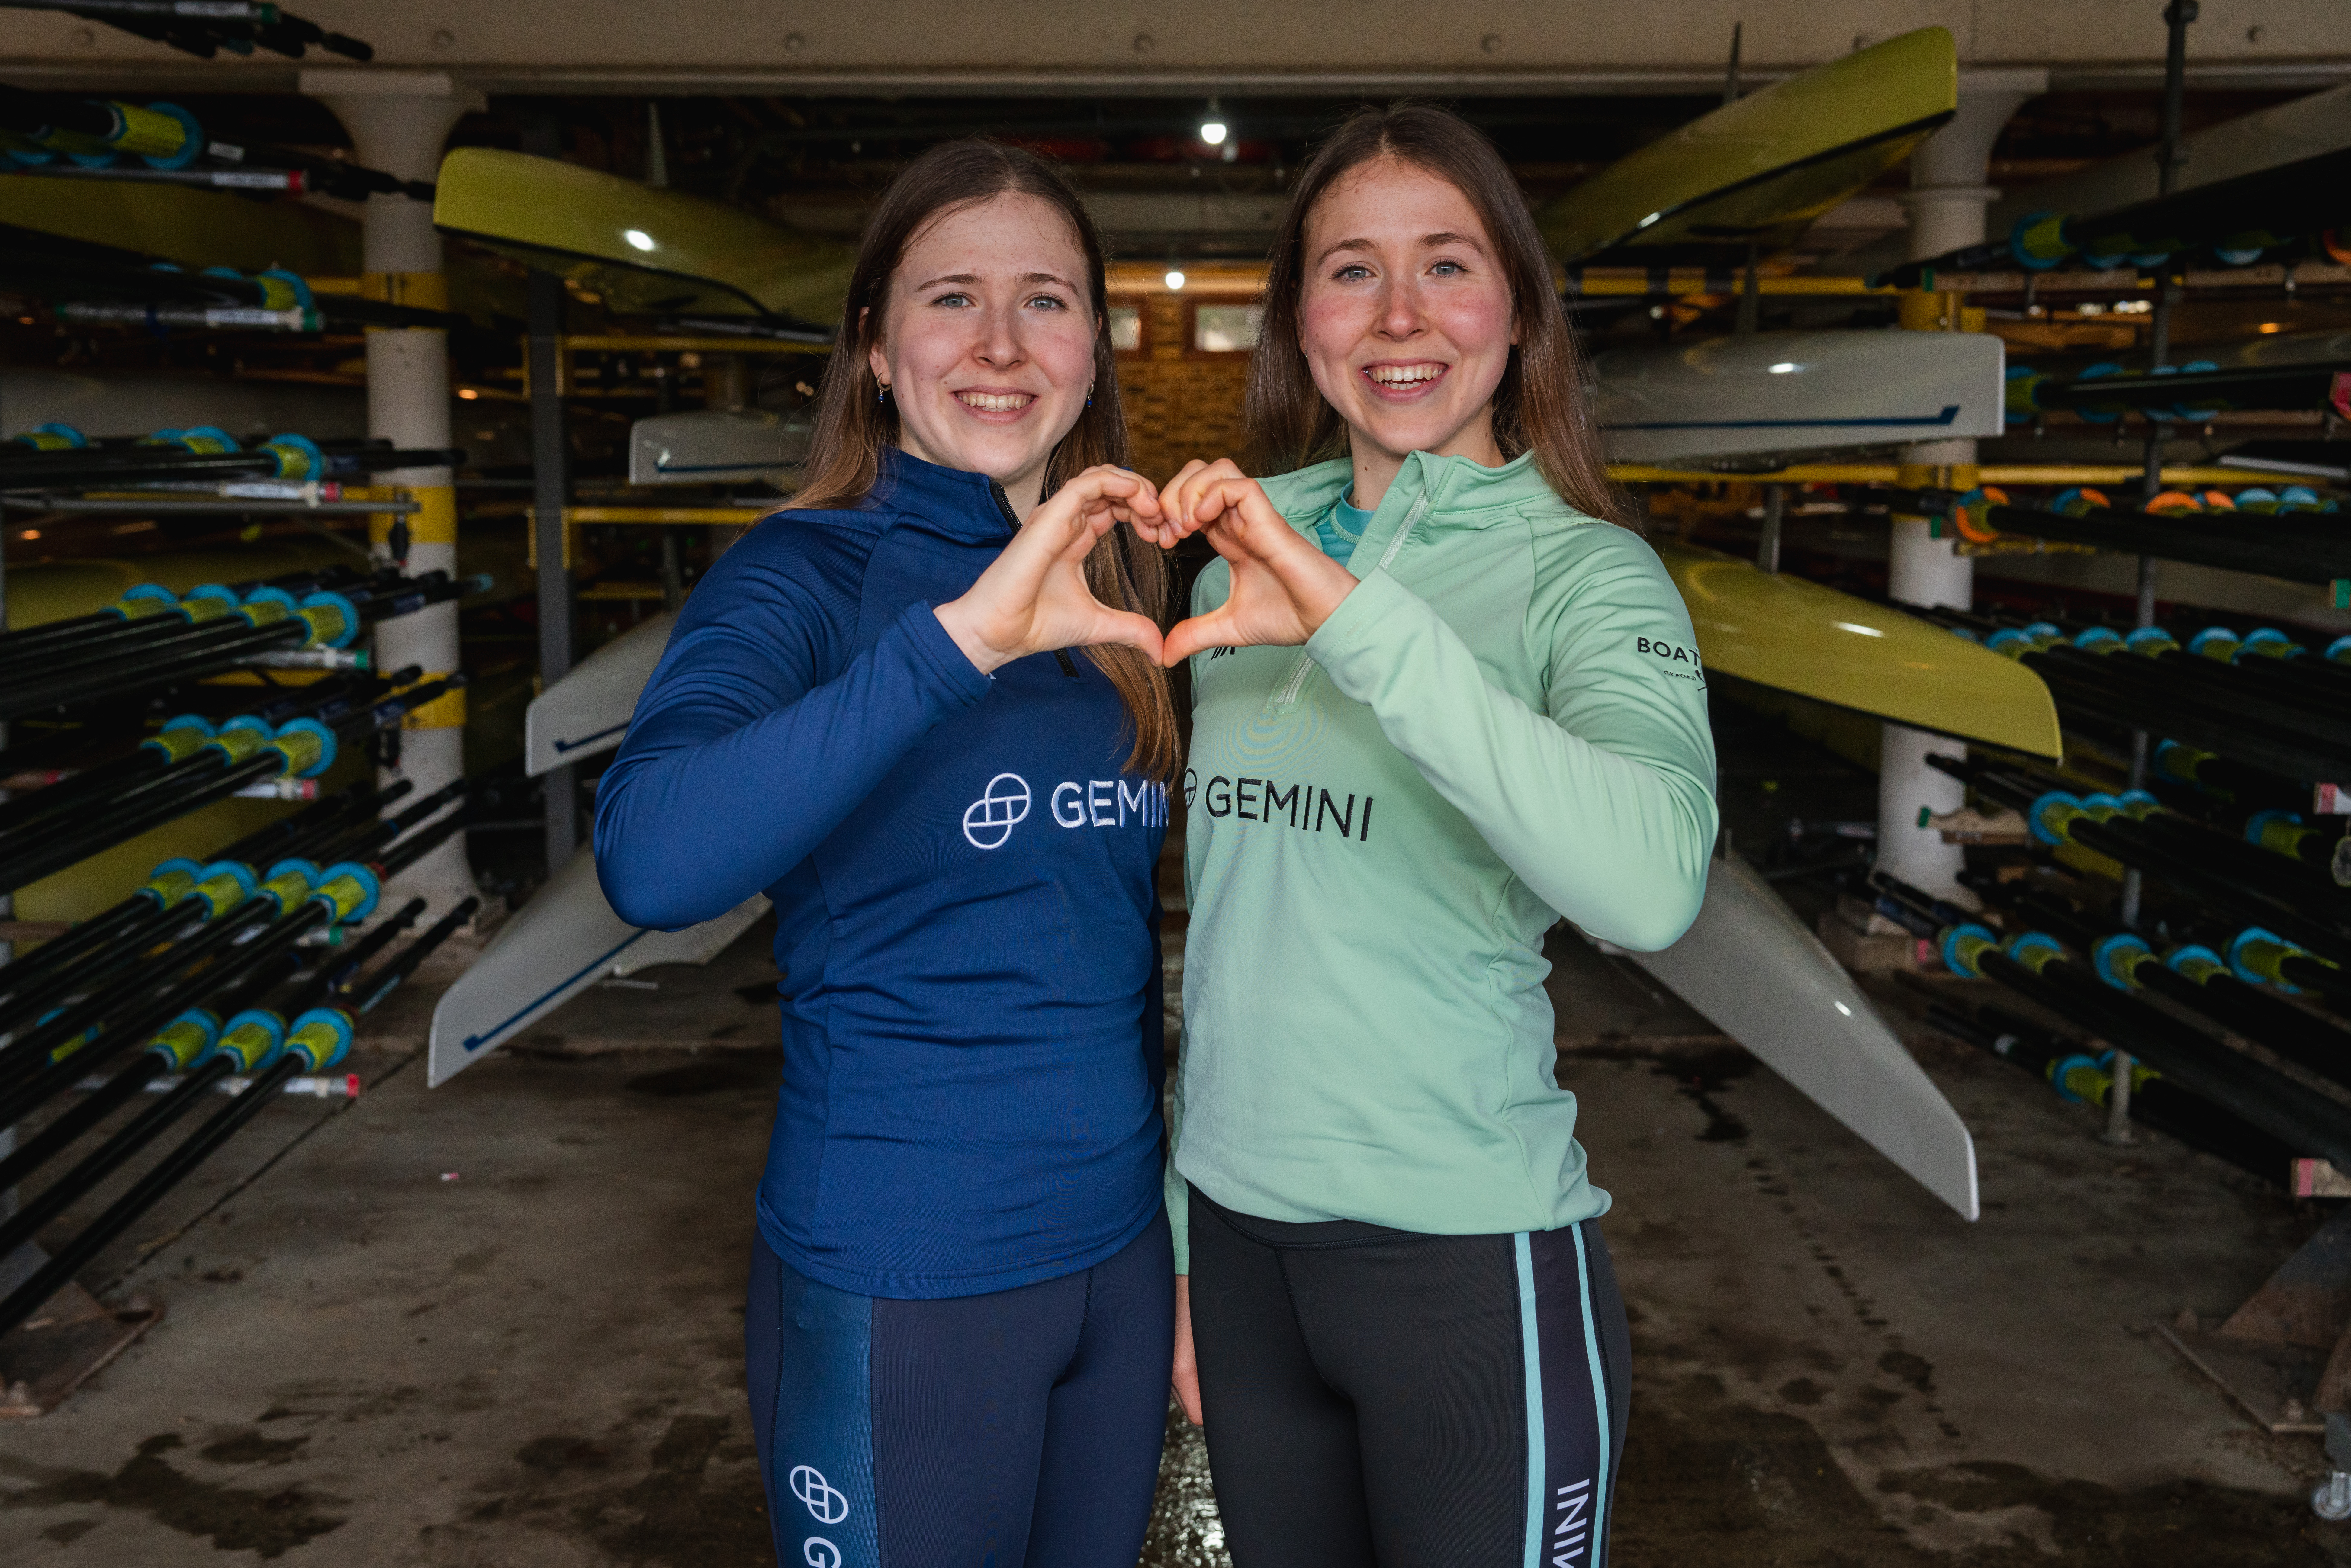 A photo of Catherine and Gemma King making a heart with their hands